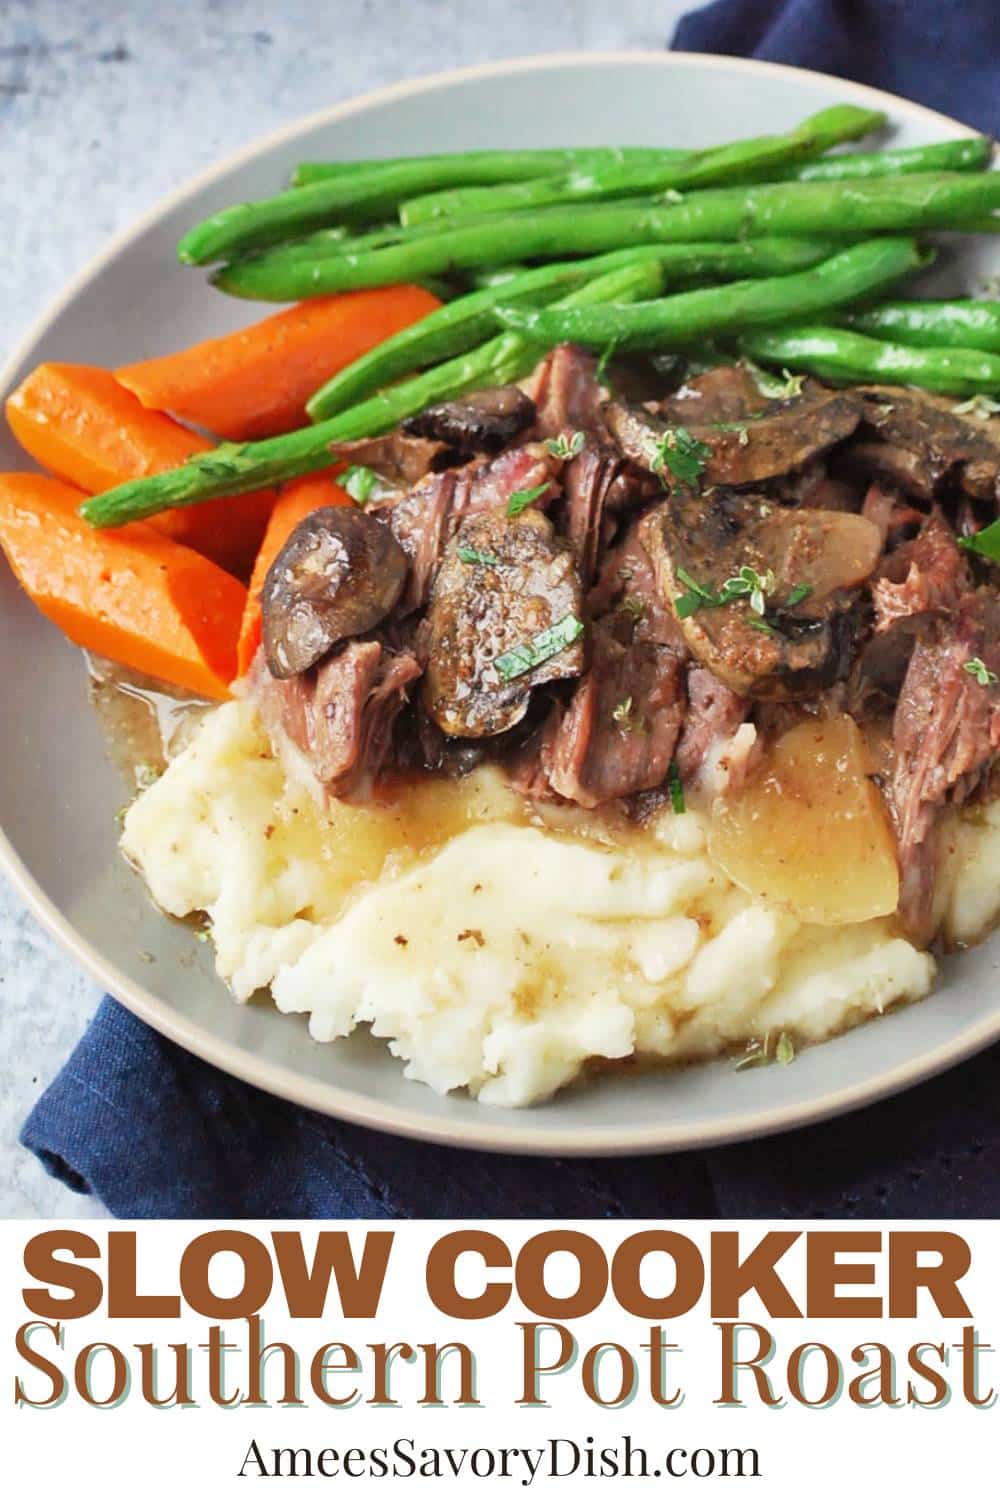 An easy and delicious recipe for Slow Cooker Southern Pot Roast that's tender, juicy and full of amazing flavor. via @Ameessavorydish